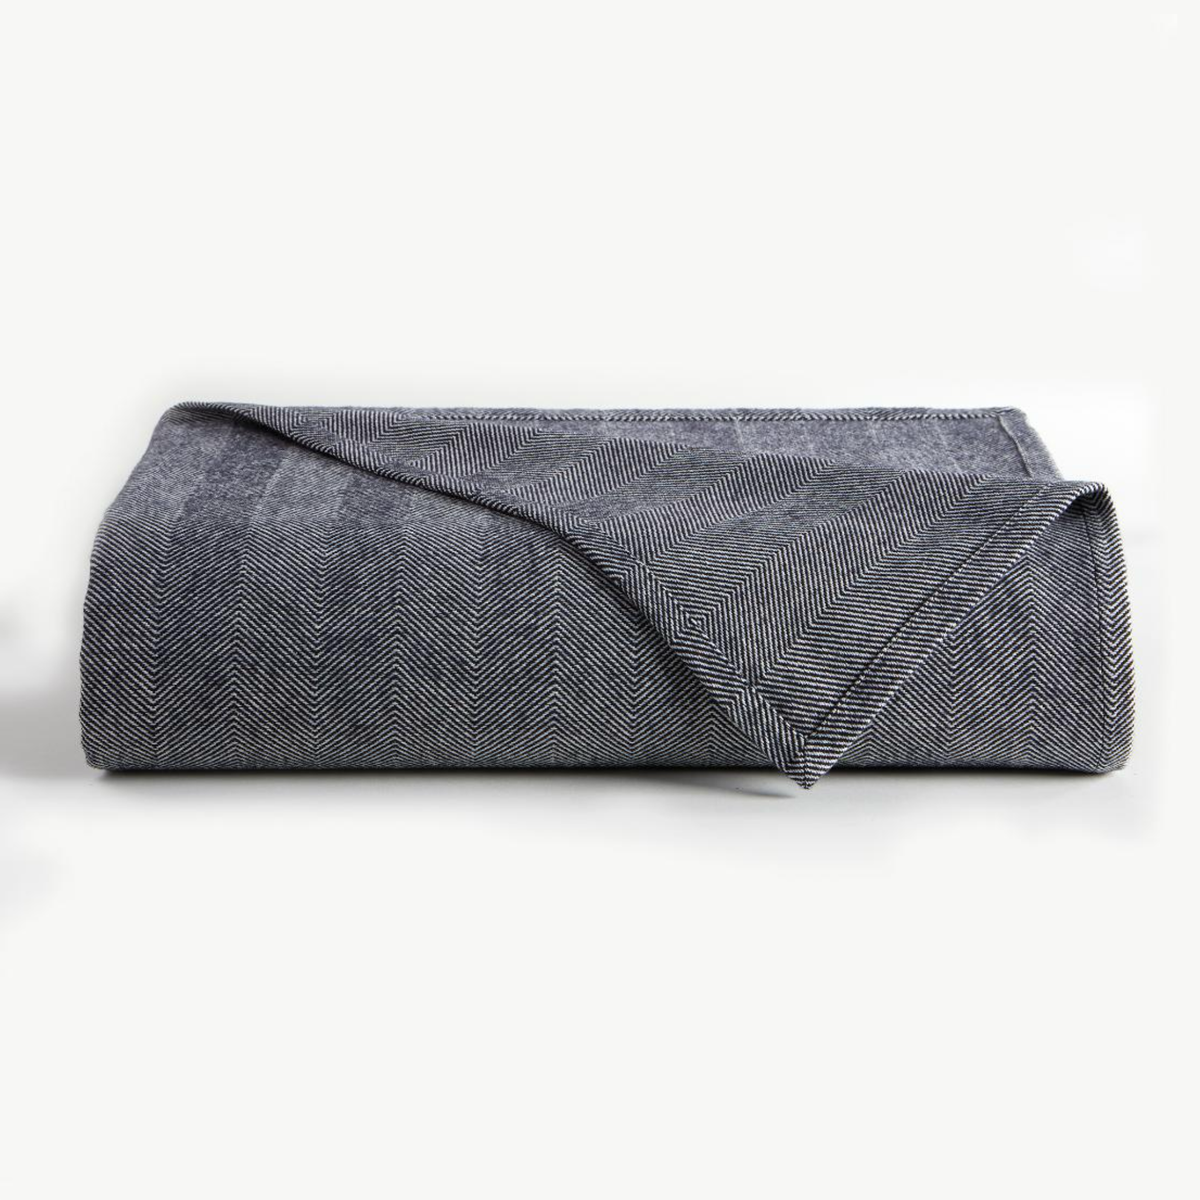 Clear Image of Downtown Company Herringbone Blanket Charcoal in Navy White Color